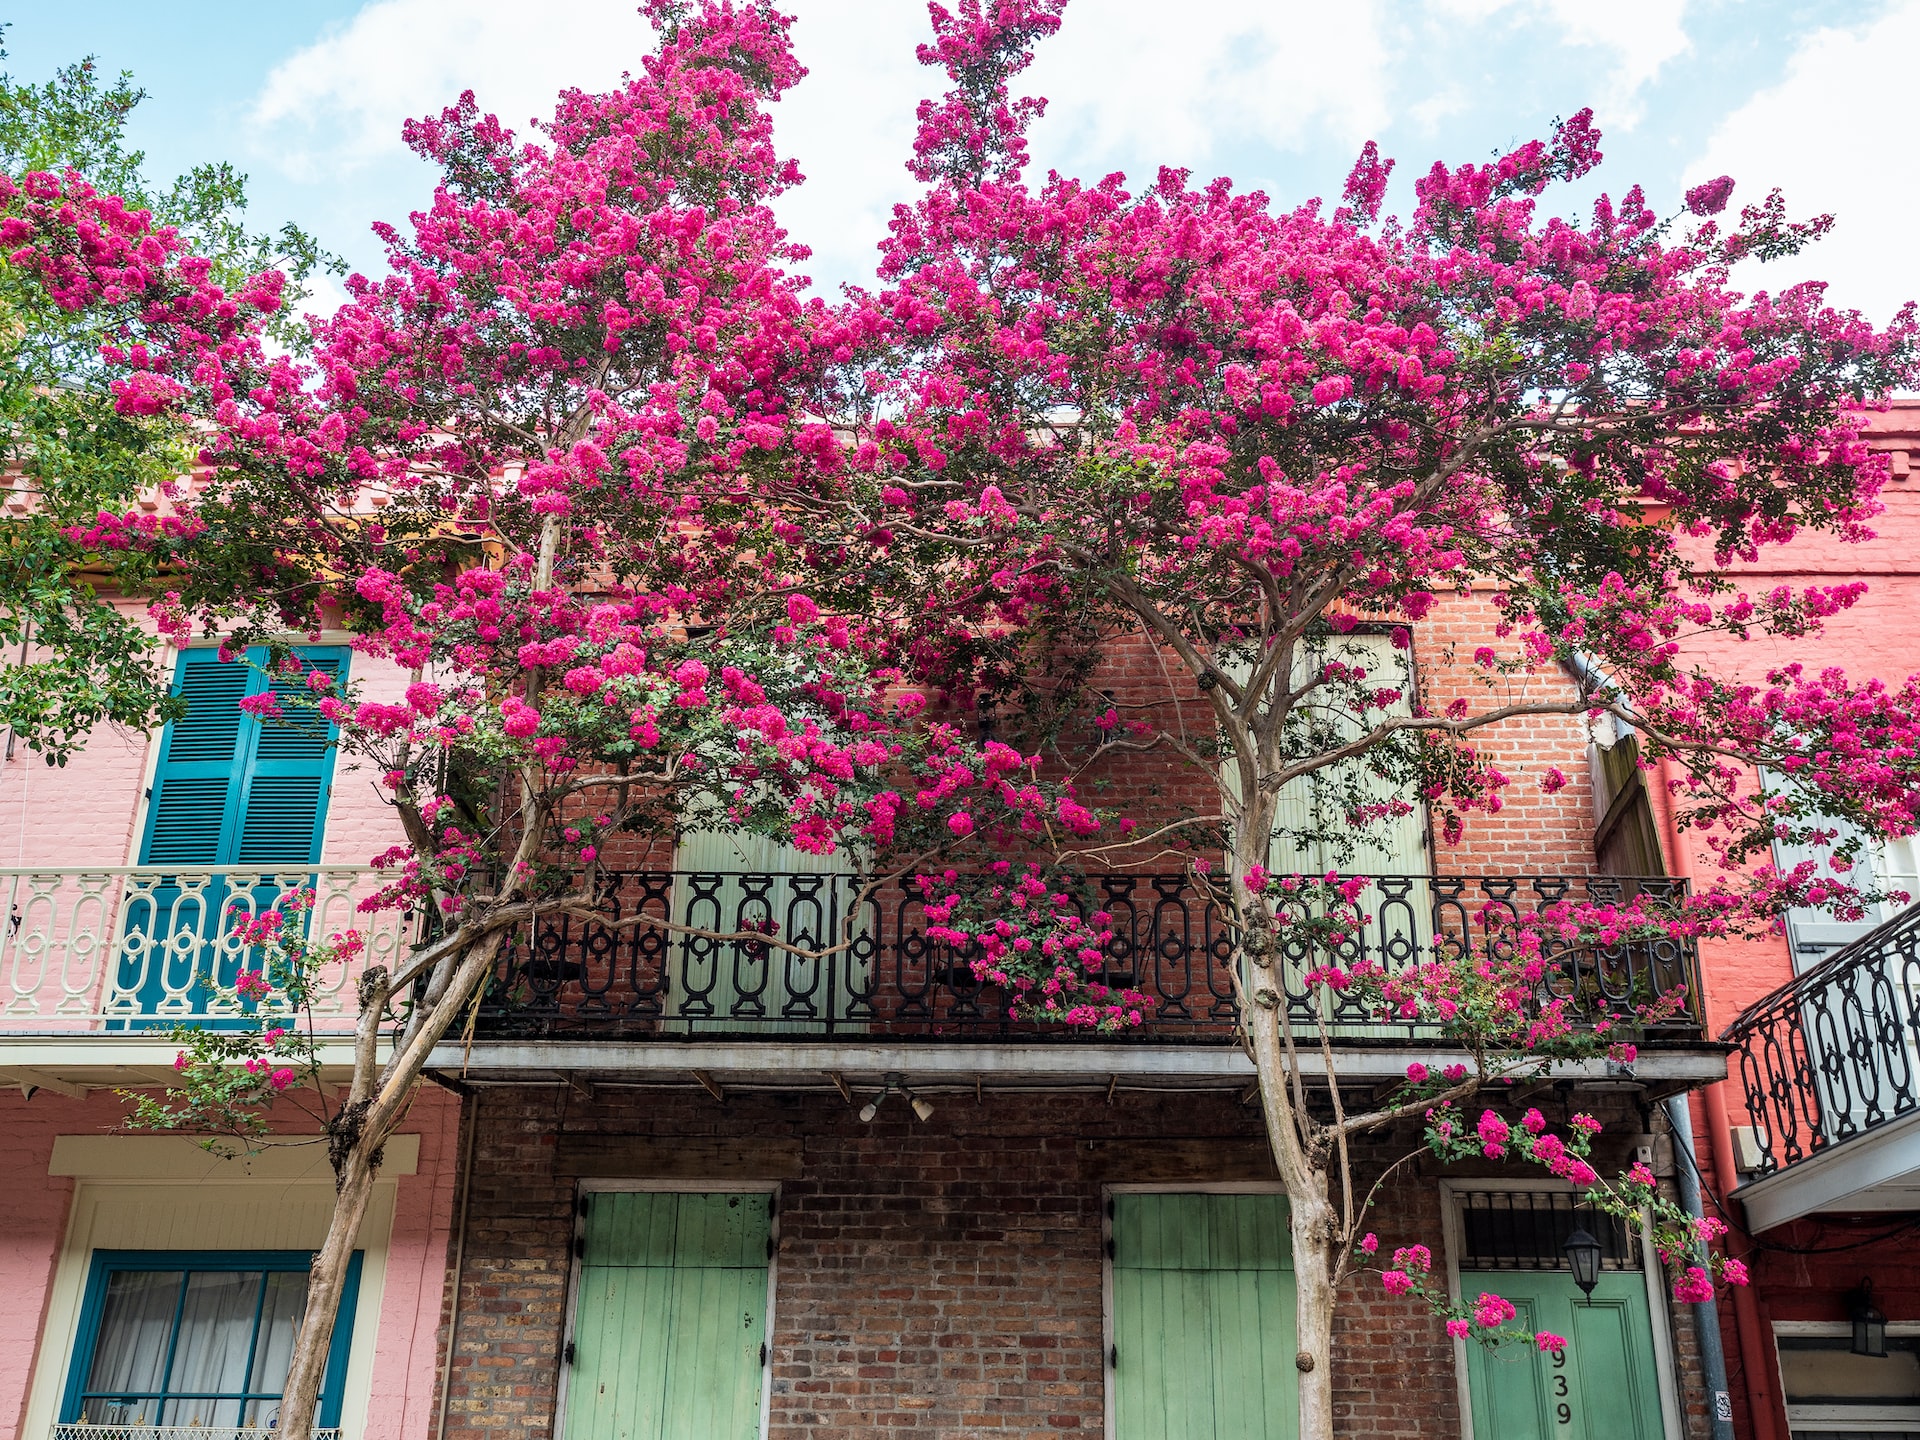 Crepe myrtle tree and Creole townhouse balcony.